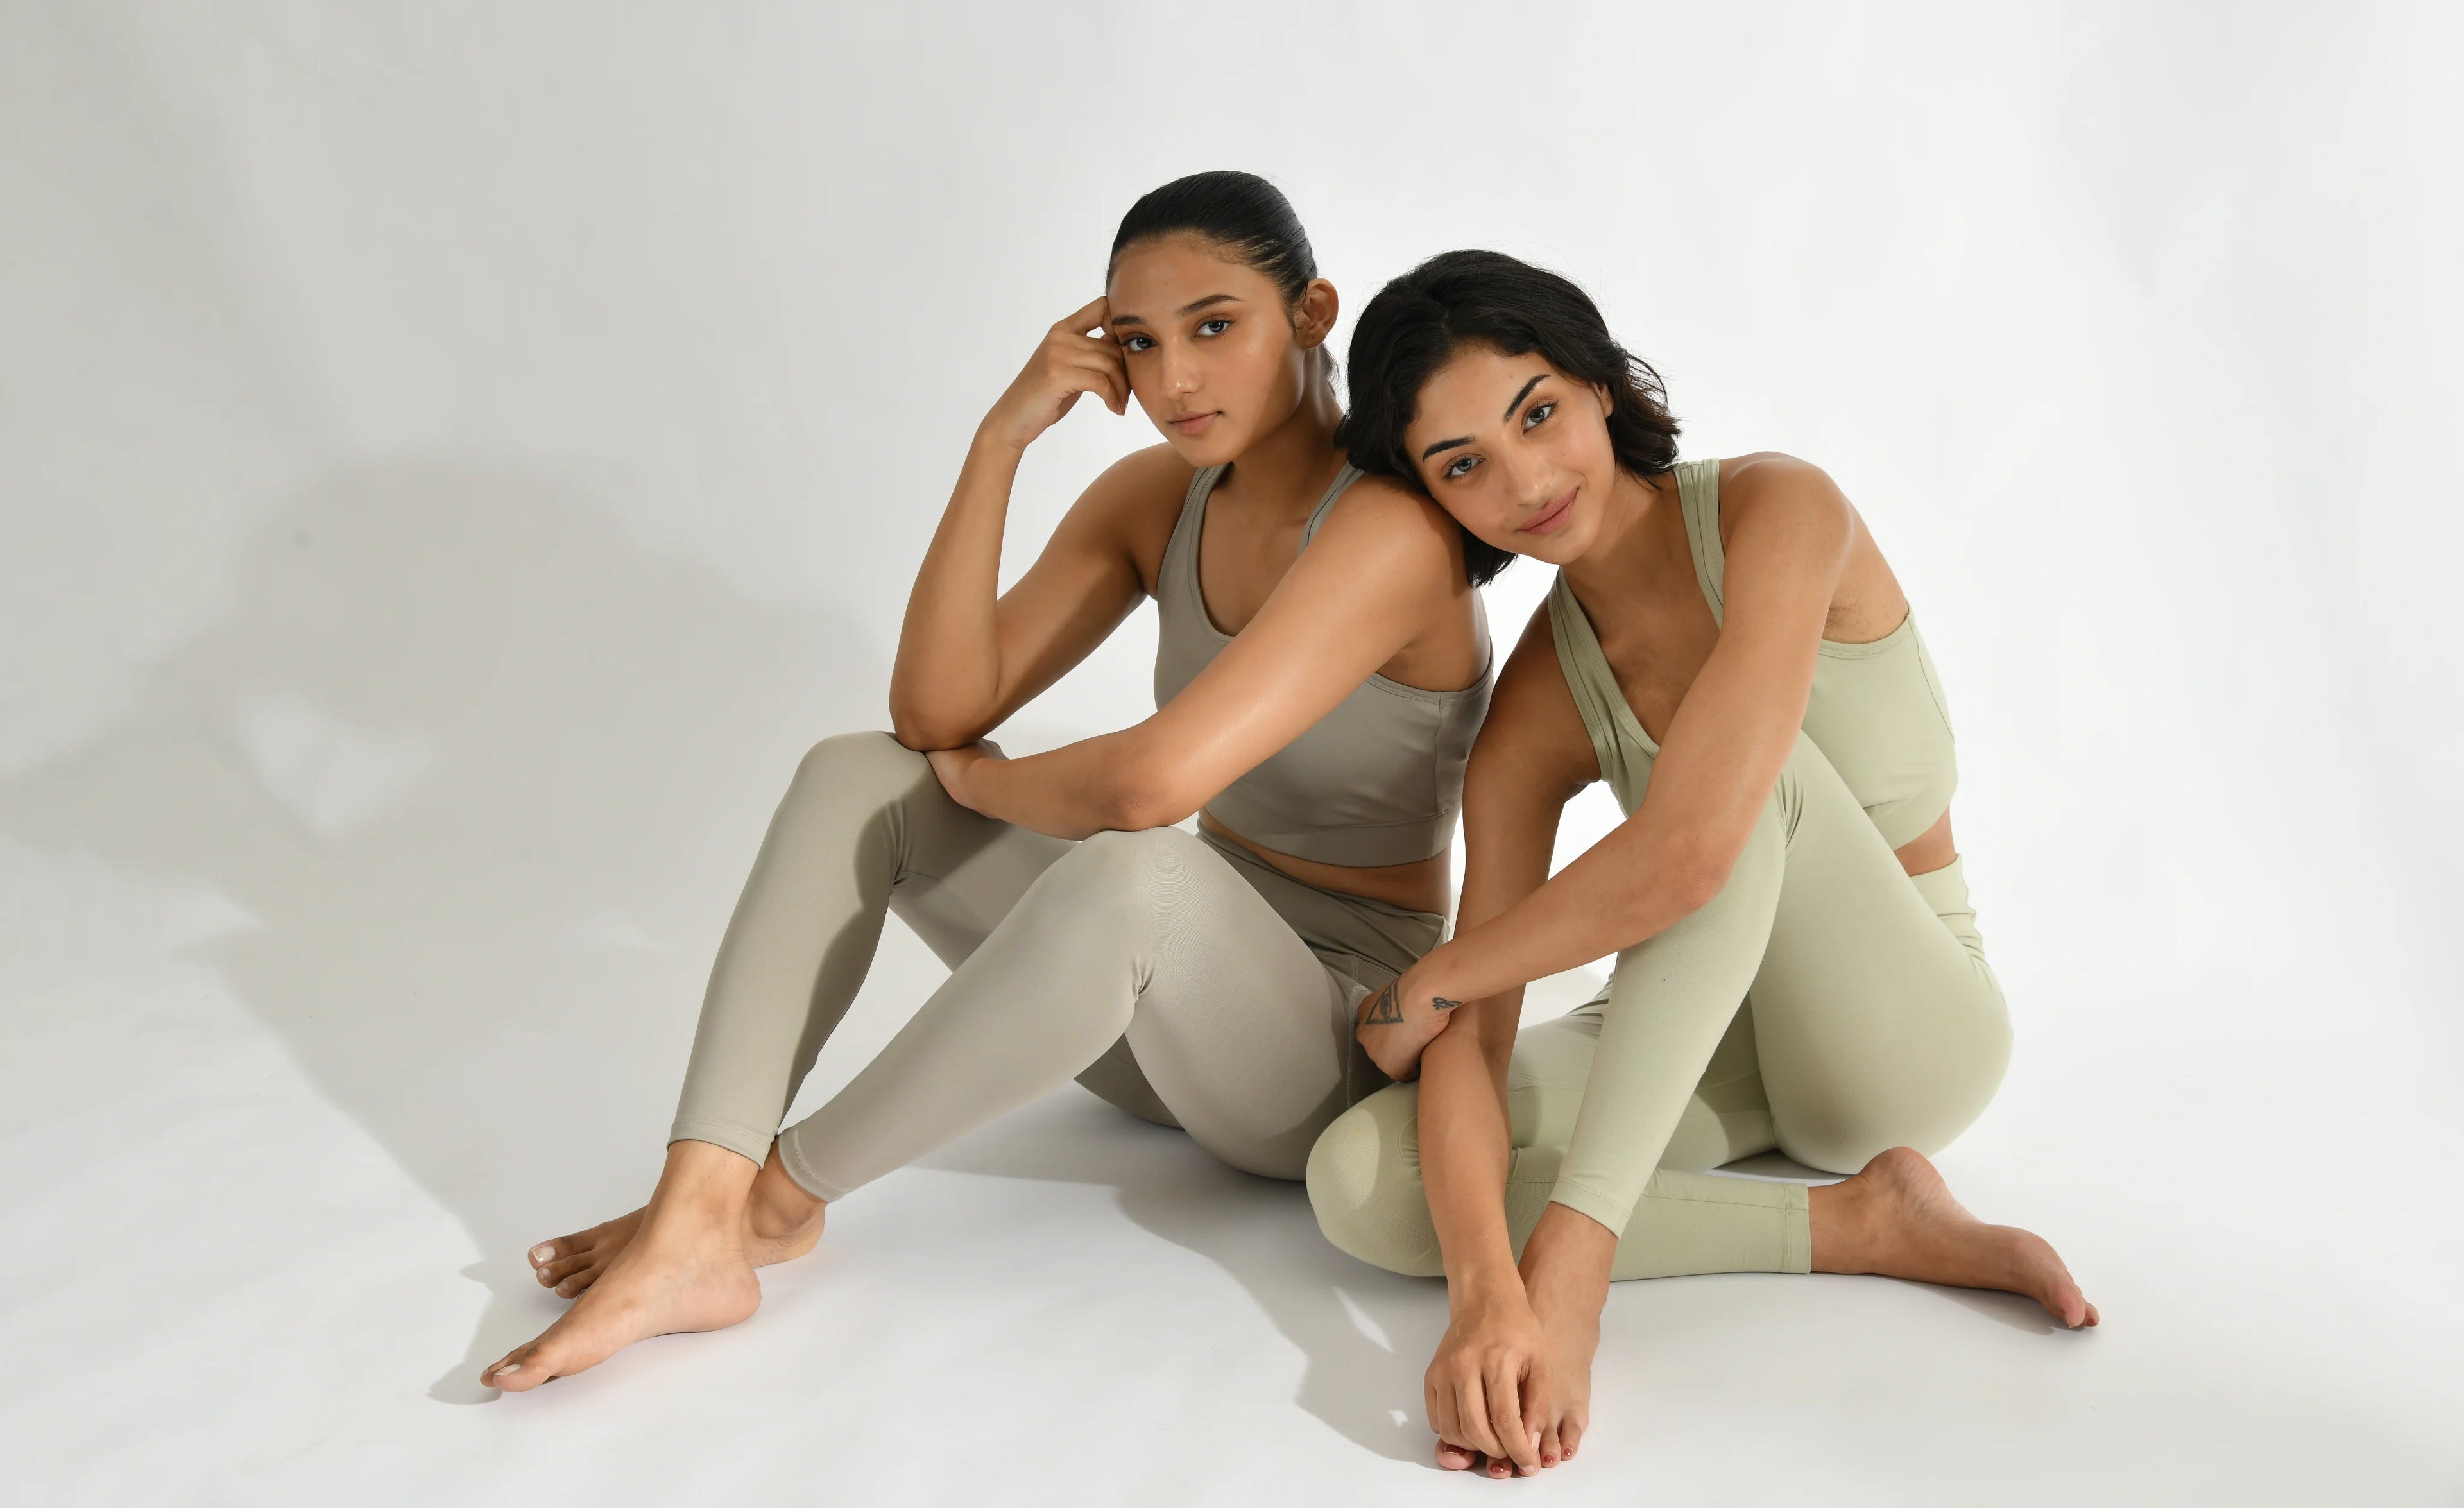 Buy Lion, Hand-sketched, Unique, Eco Yoga Leggings. Eco-friendly Yoga Pants.  Breathable, Organic Yoga Wear, High Waist Online in India 